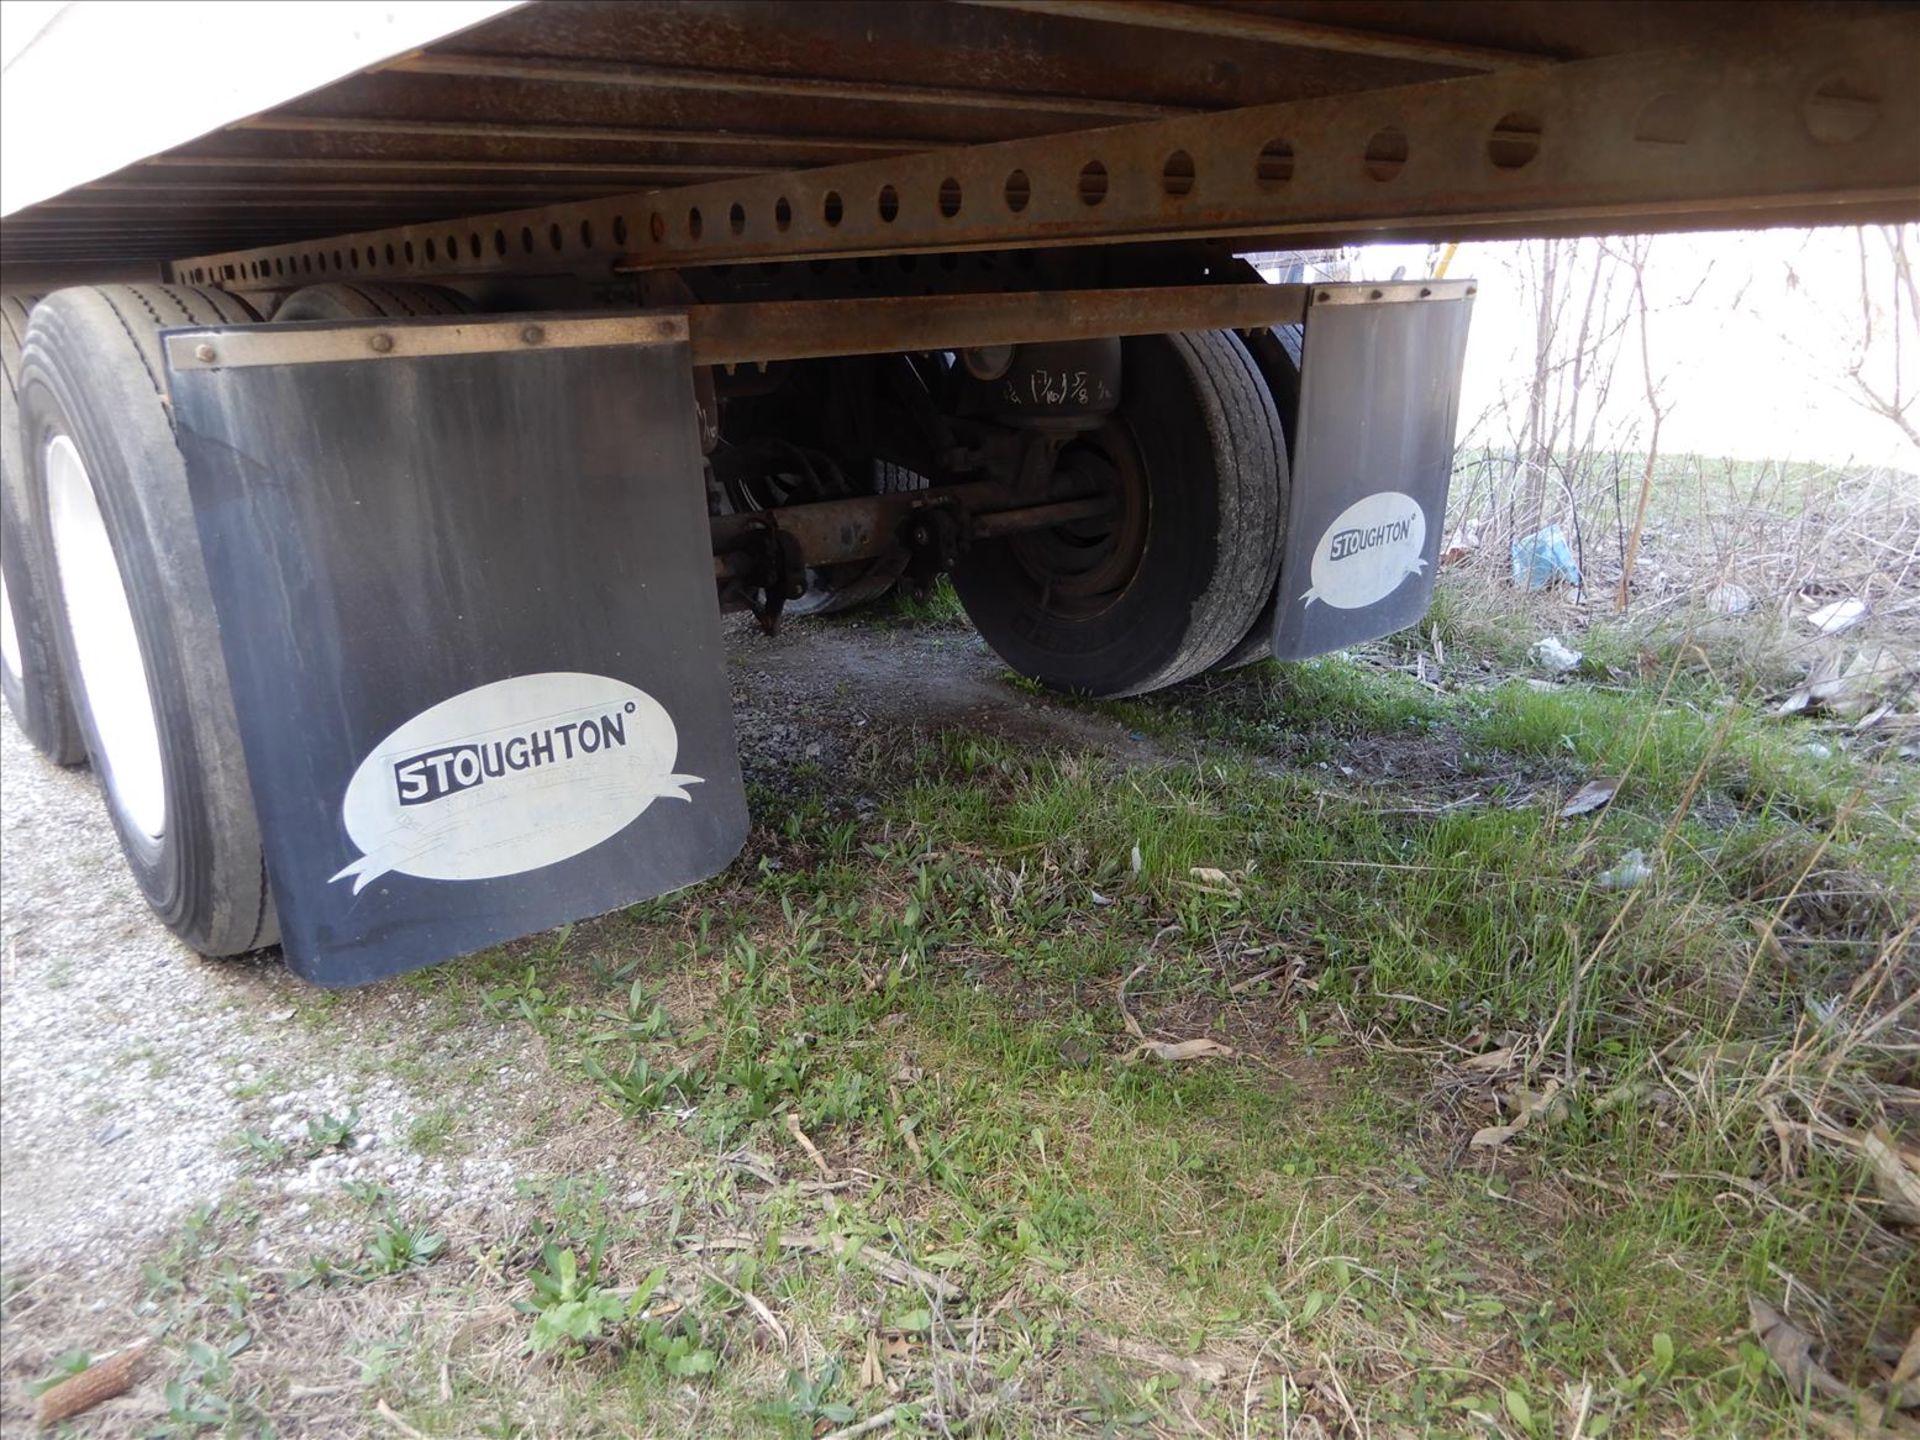 2012 Stoughton Trailer - Located in Indianapolis, IN - Image 16 of 28